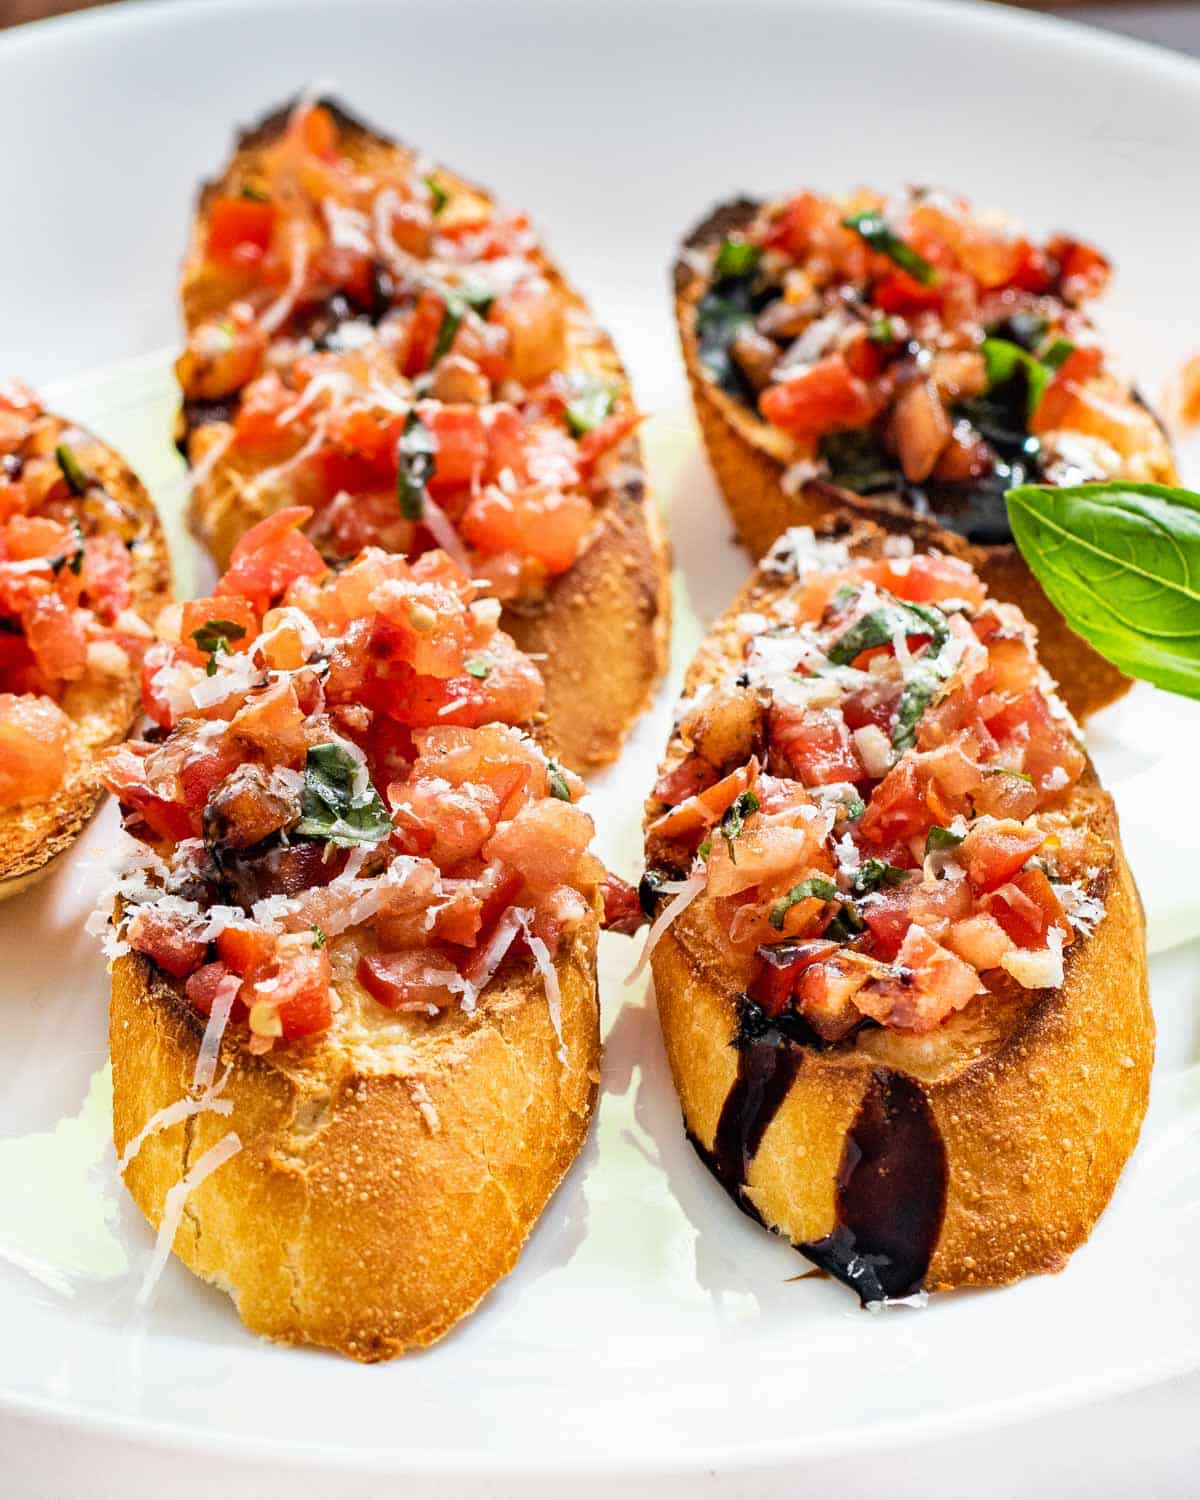 Easy Bruschetta - Craving Home Cooked